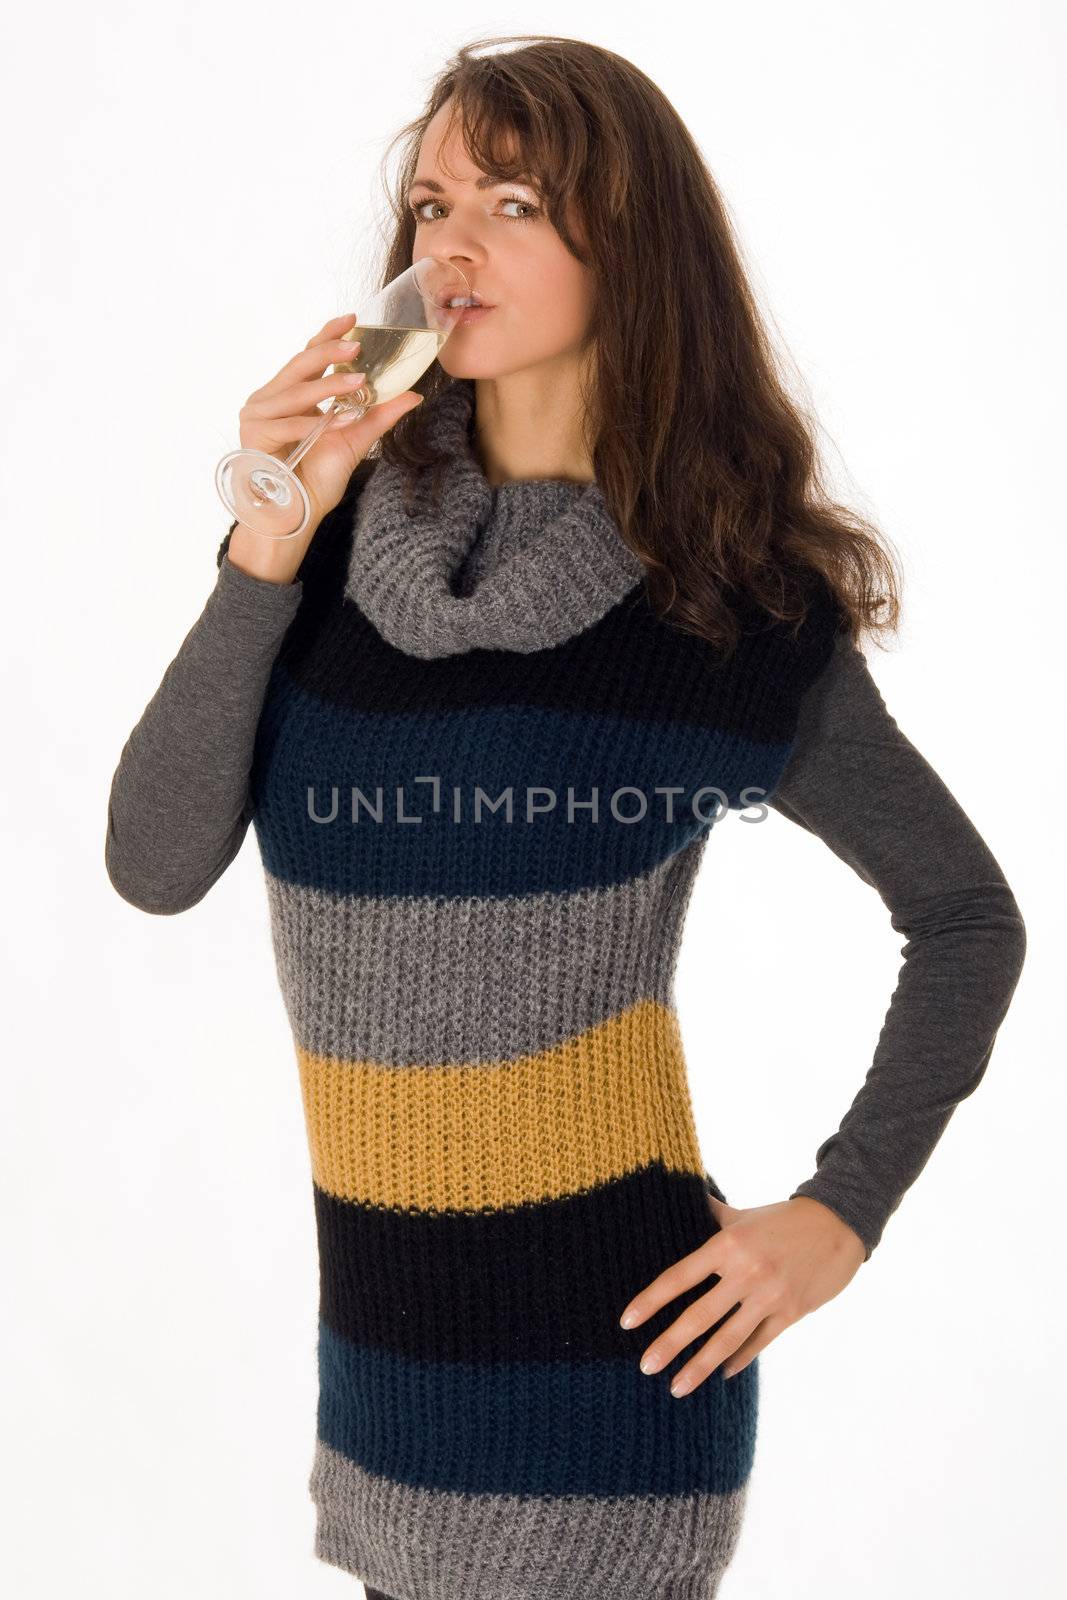 Elegant young woman drinking a glass of champagne